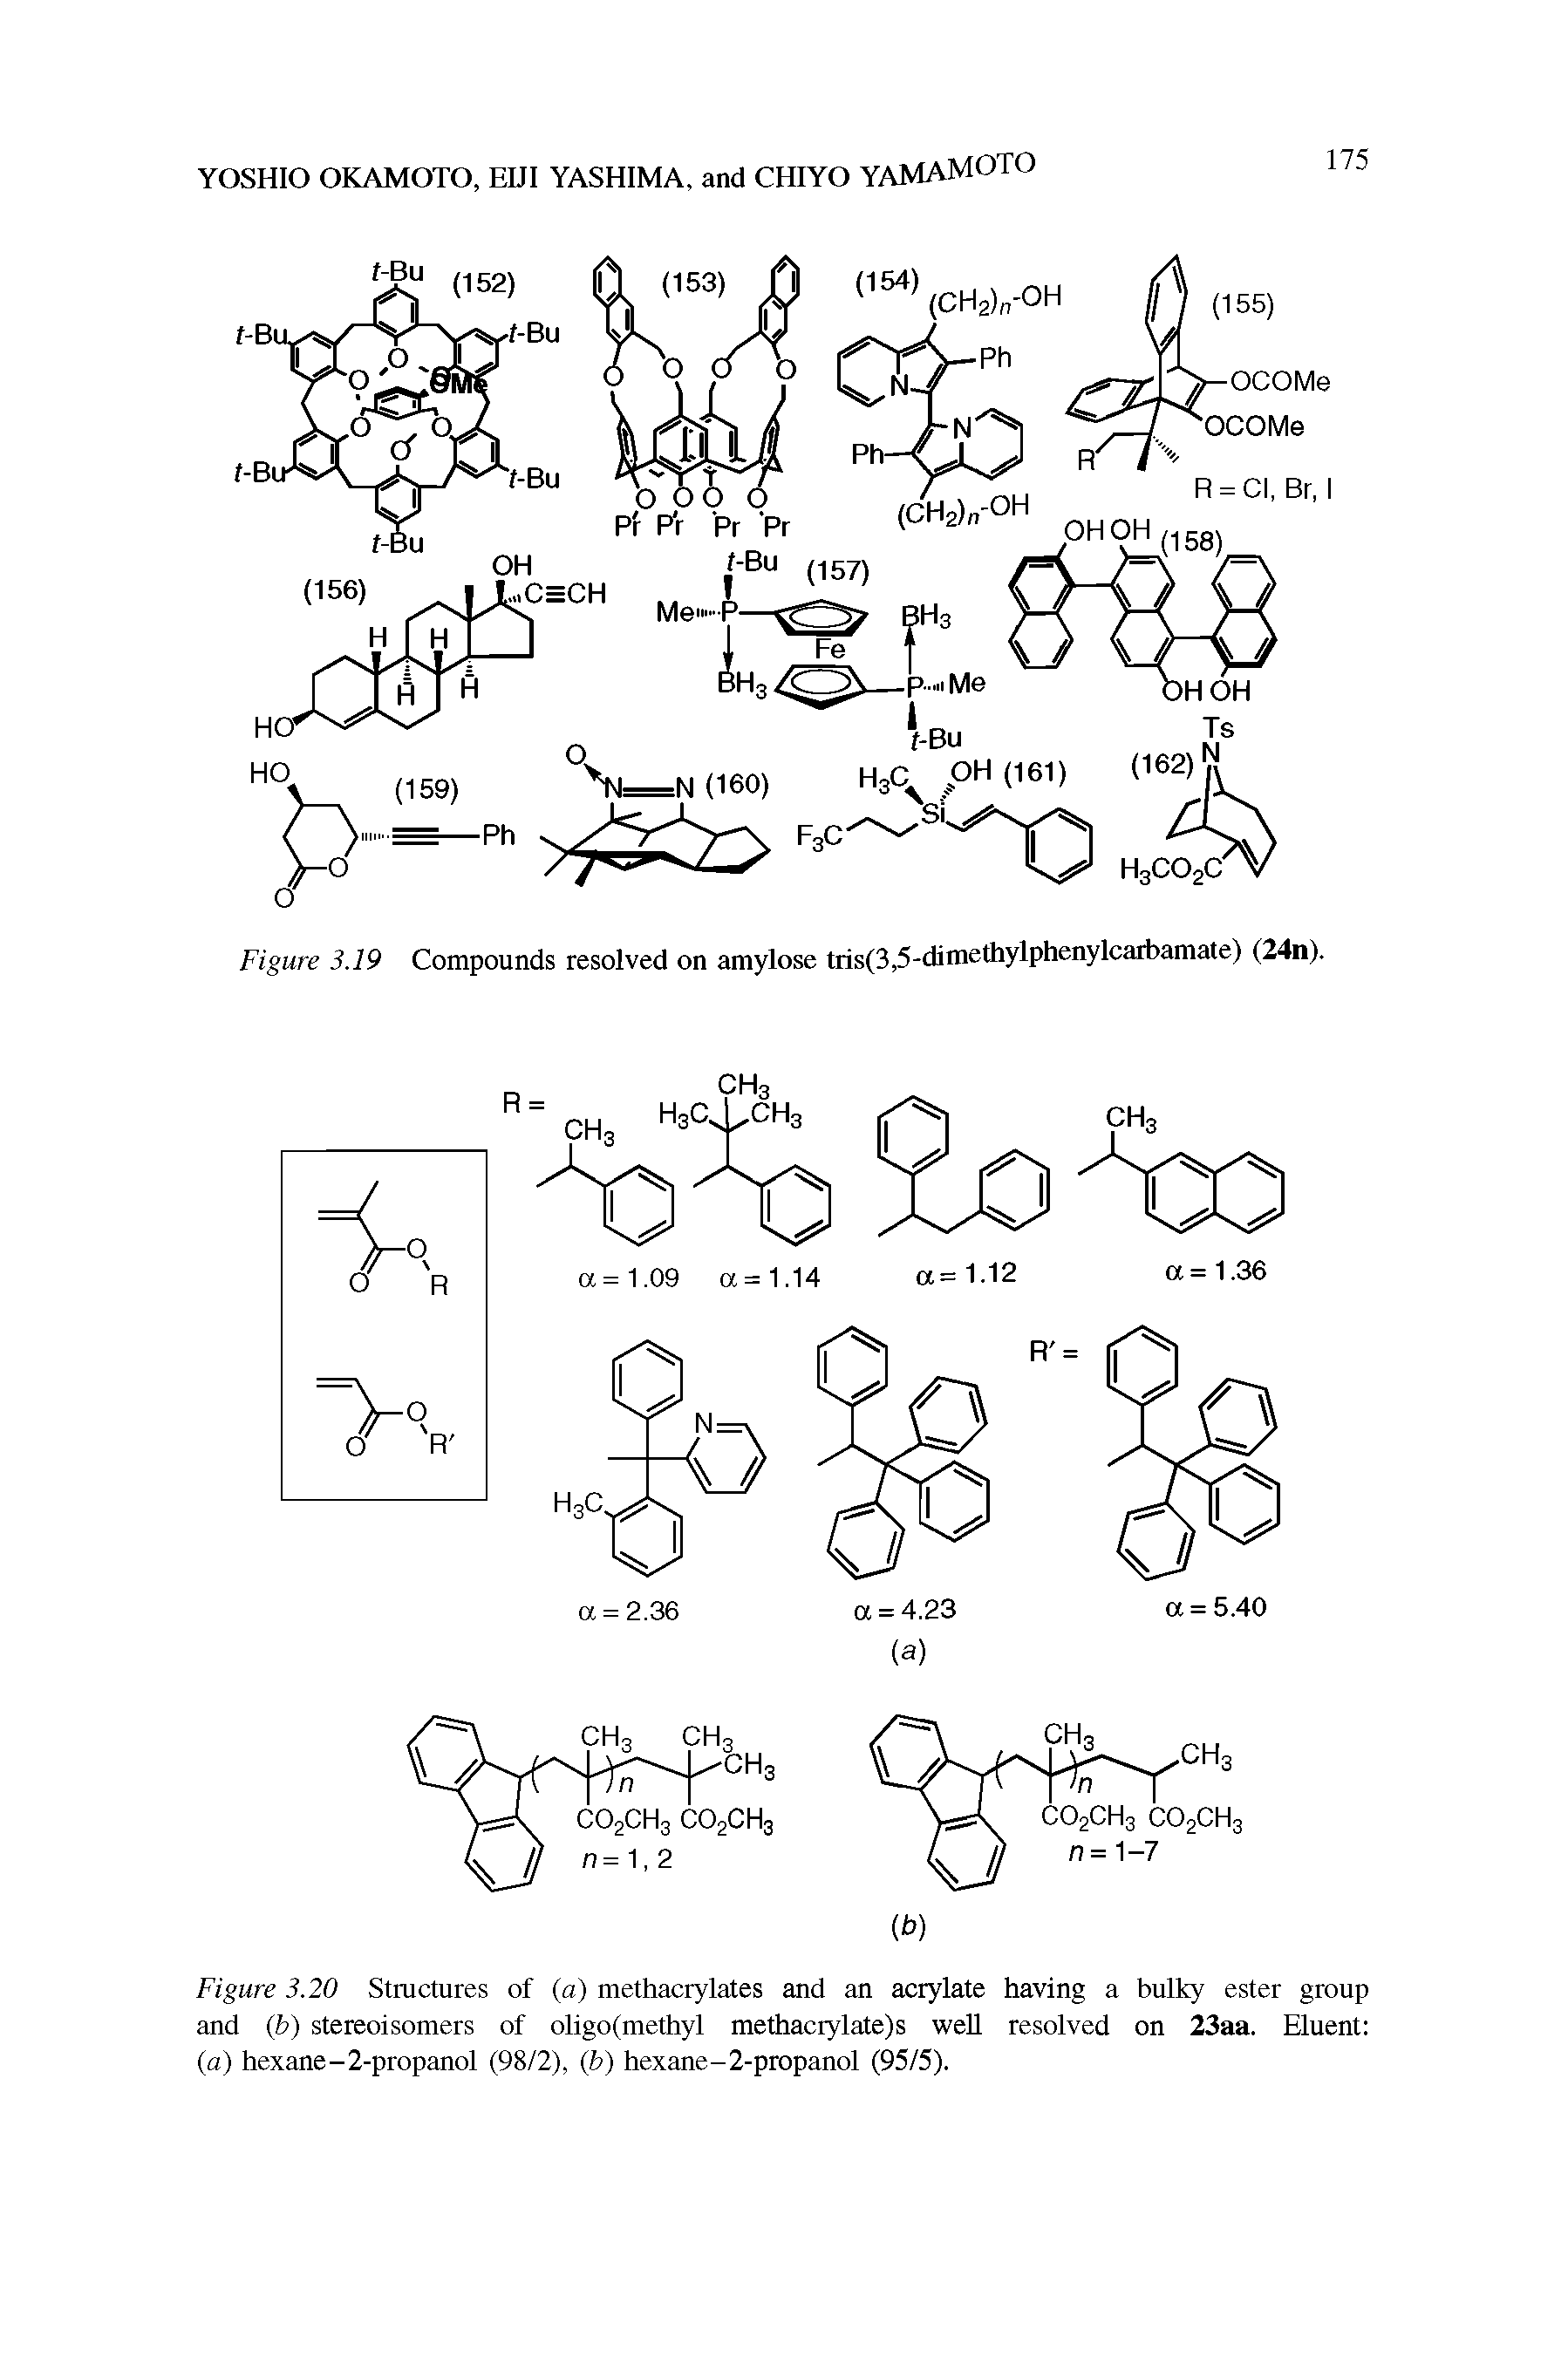 Figure 3.20 Structures of (a) methacrylates and an acrylate having a bulky ester group and (b) stereoisomers of oligo(methyl methacrylate)s well resolved on 23aa. Eluent (a) hexane-2-propanol (98/2), (b) hexane-2-propanol (95/5).